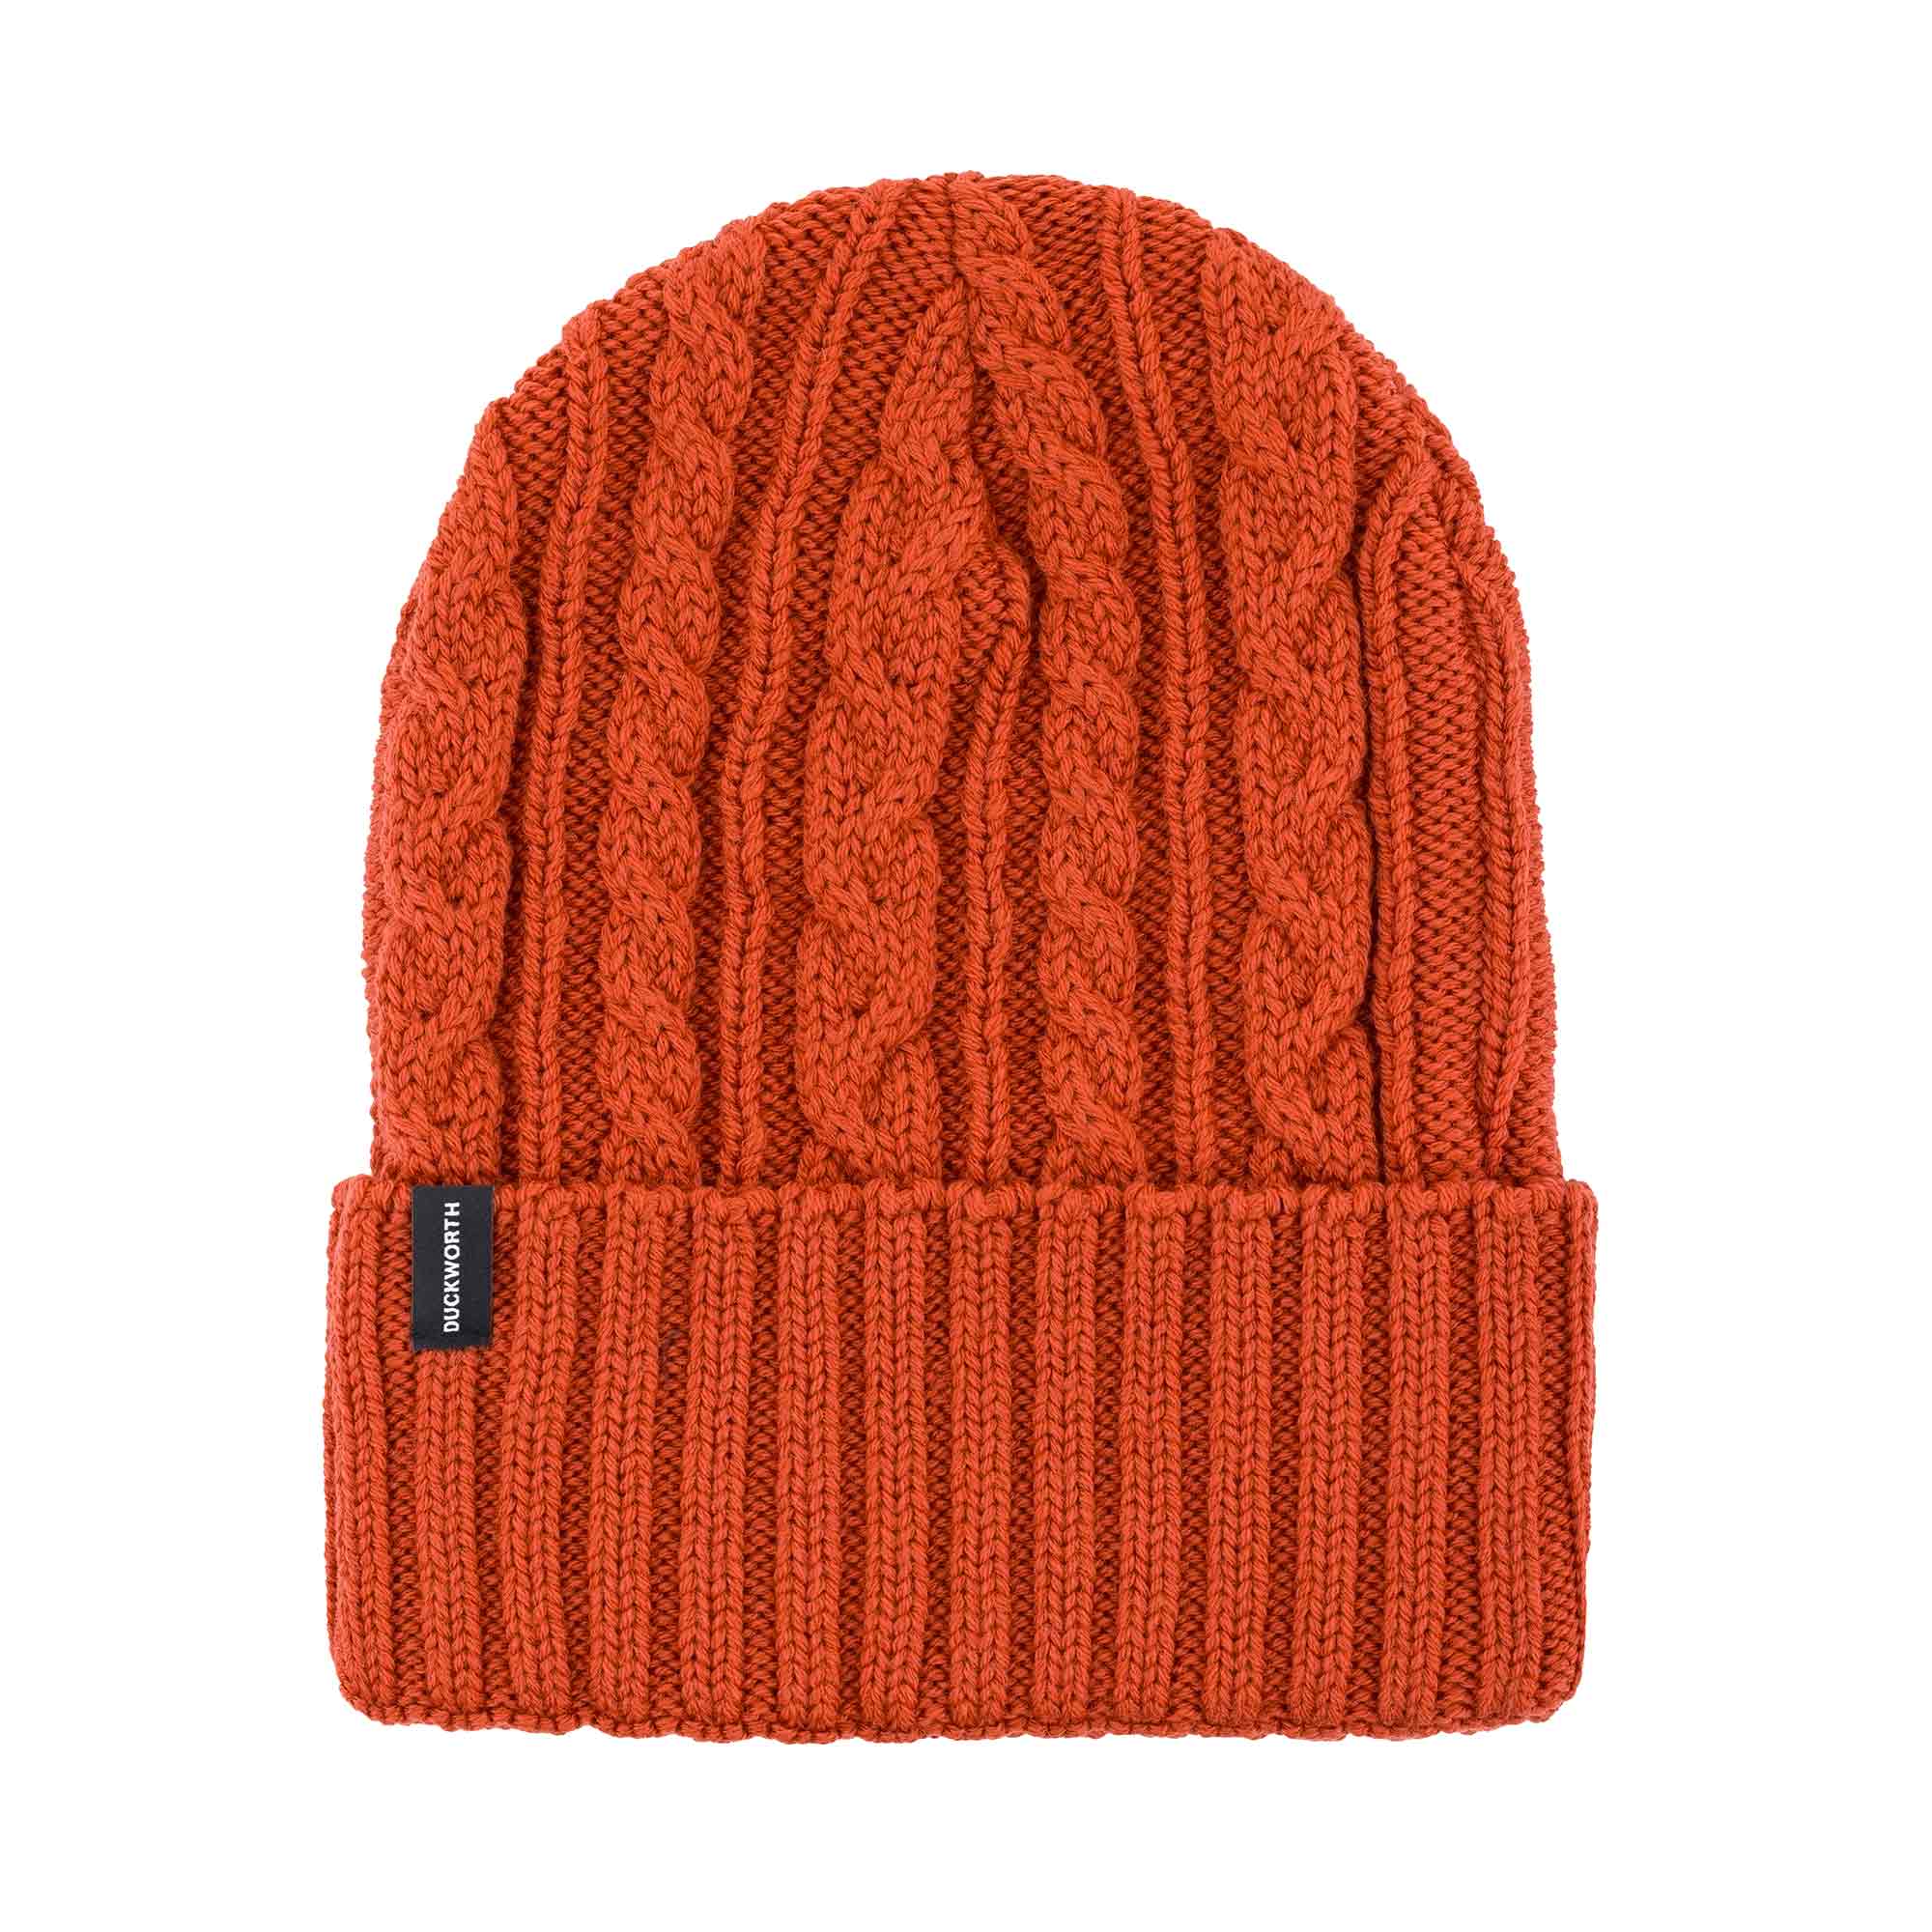 Knit Cable Hat